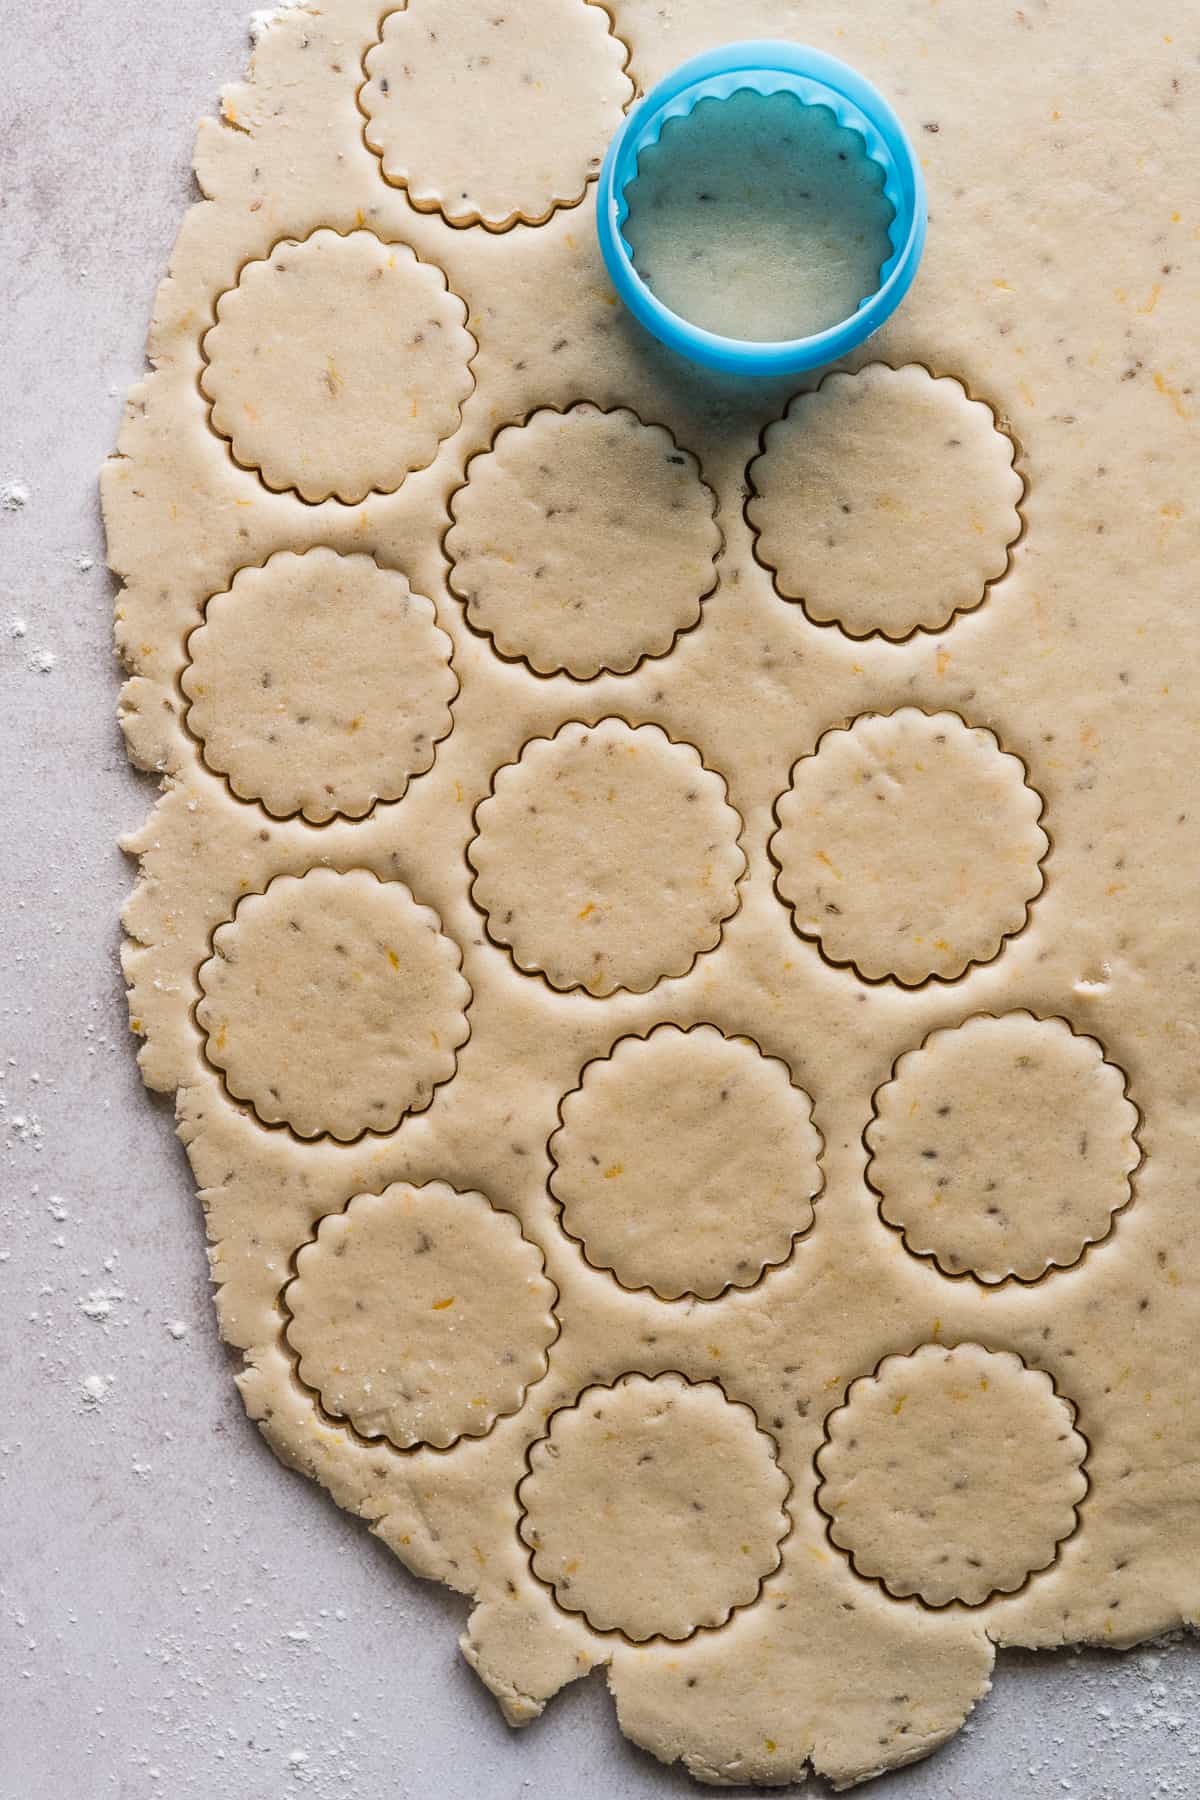 Biscochitos being stamped out with a cookie cutter.